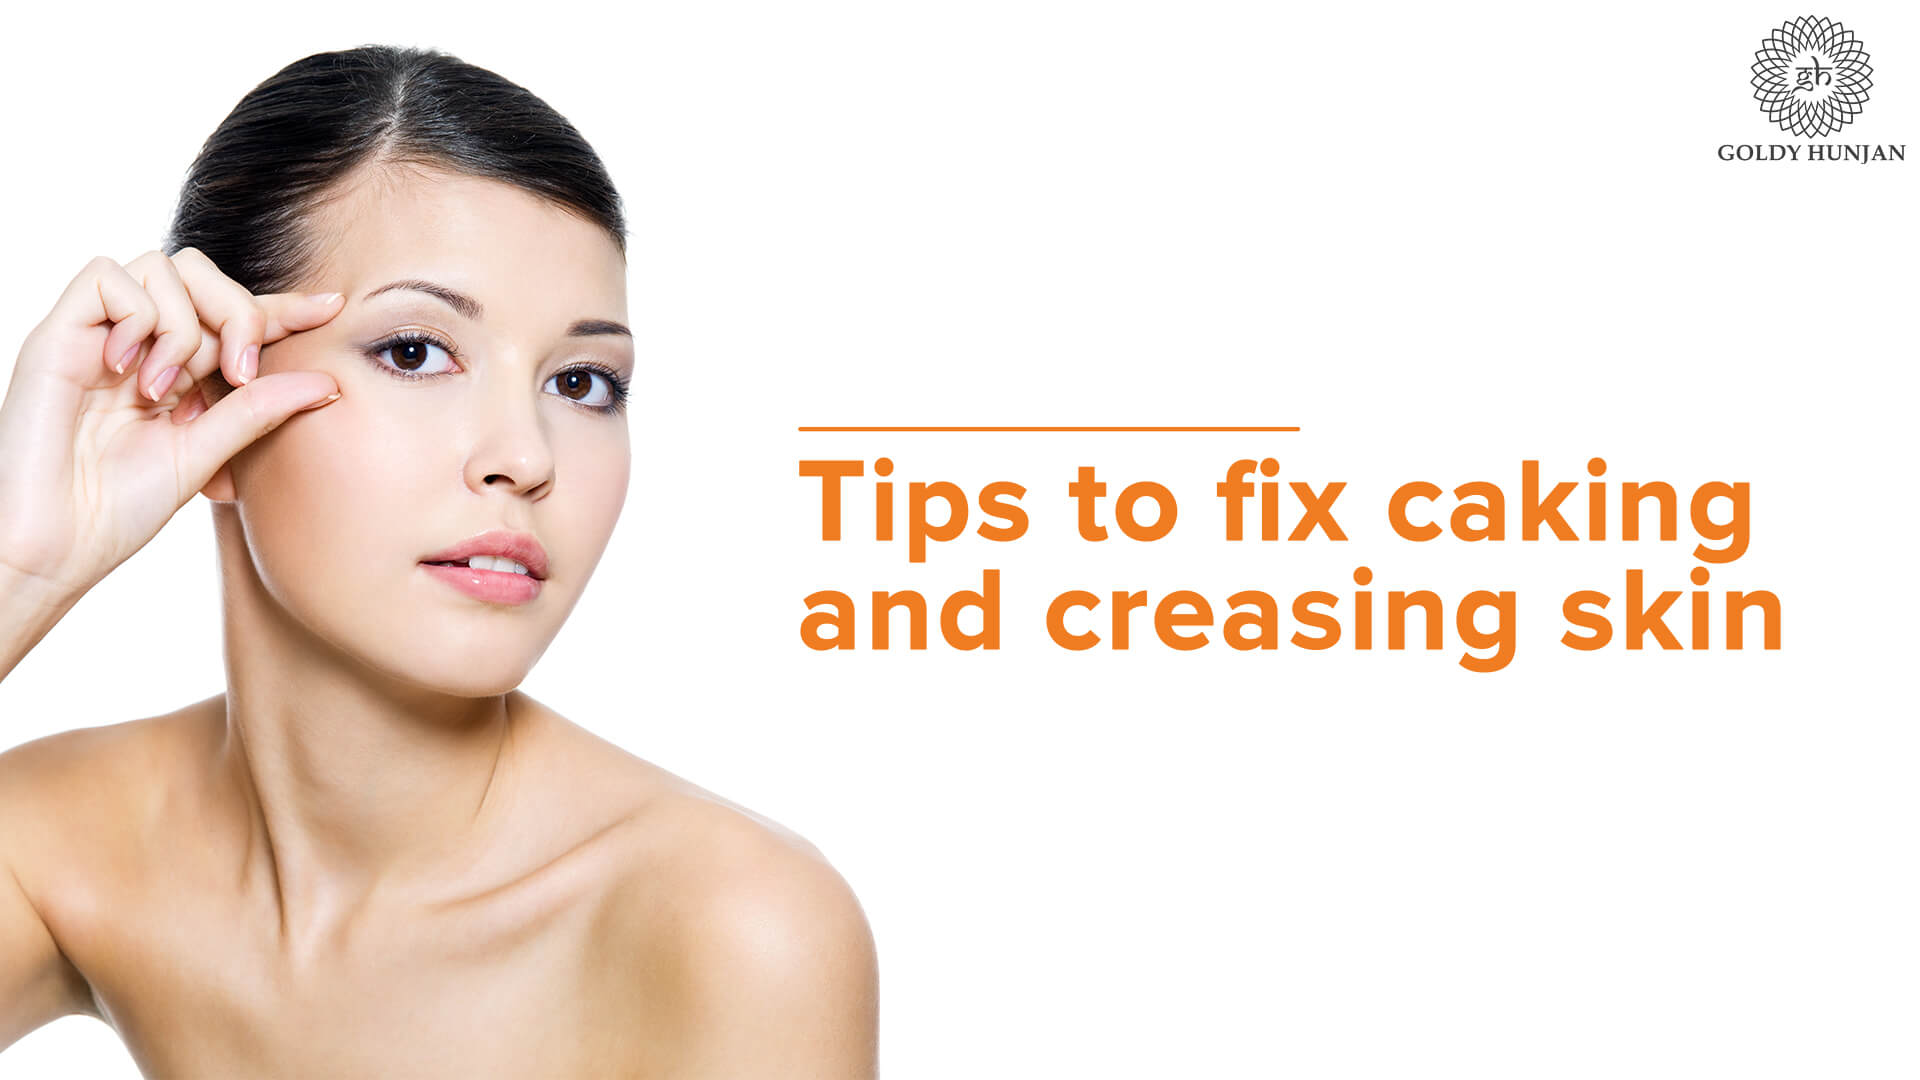 tips to fix caking and creasing skin